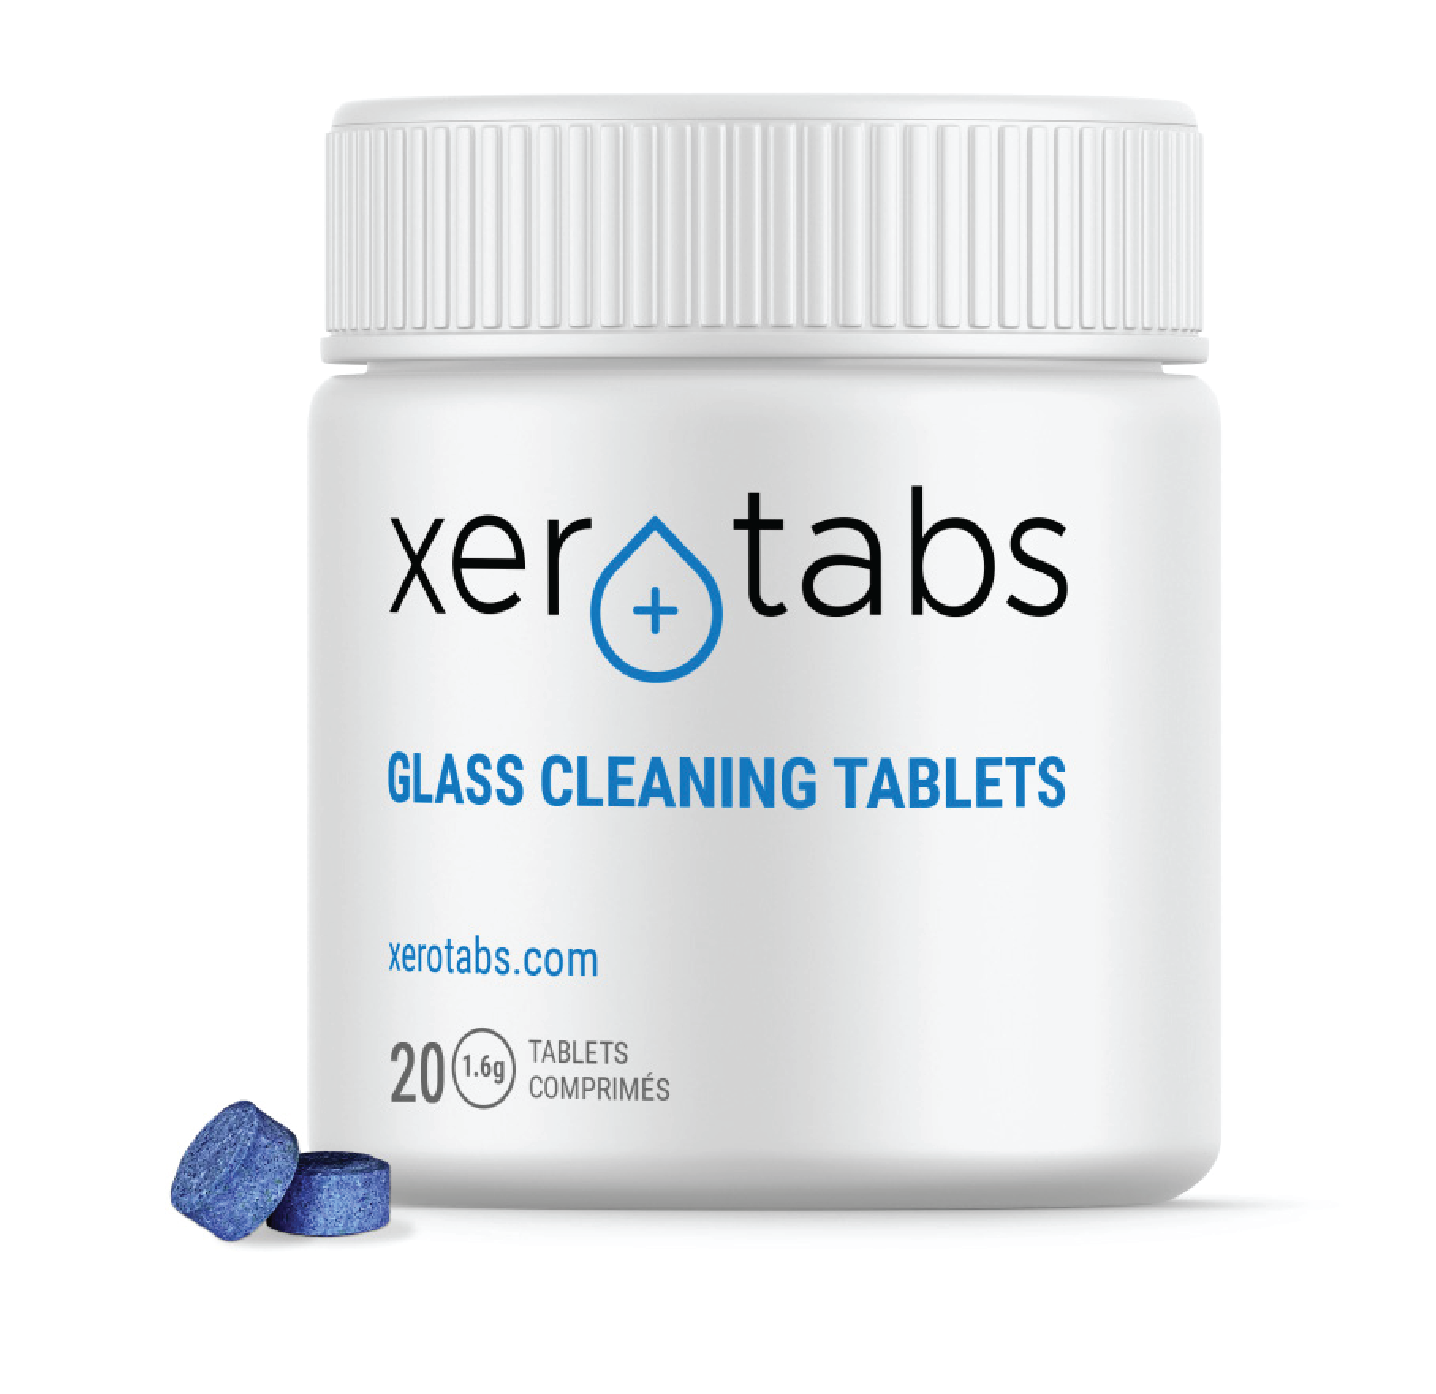 Glass Cleaning Tablets